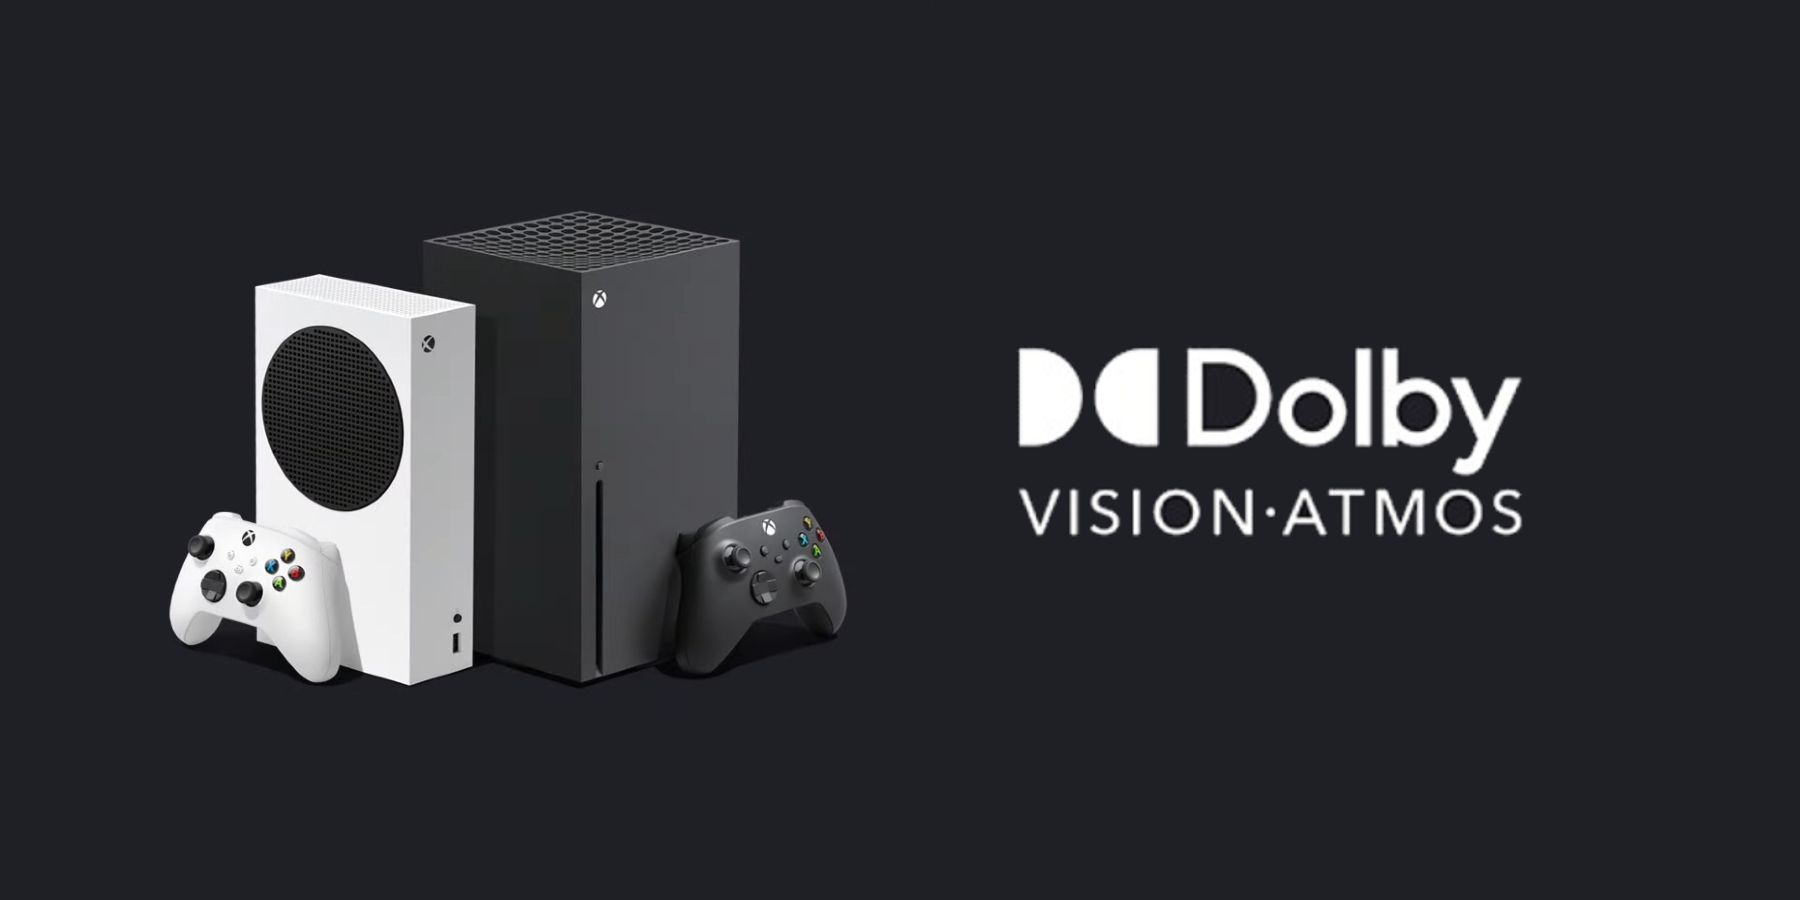 Xbox Series X / S voegt Dolby Vision en Dolby Atmos-functies toe